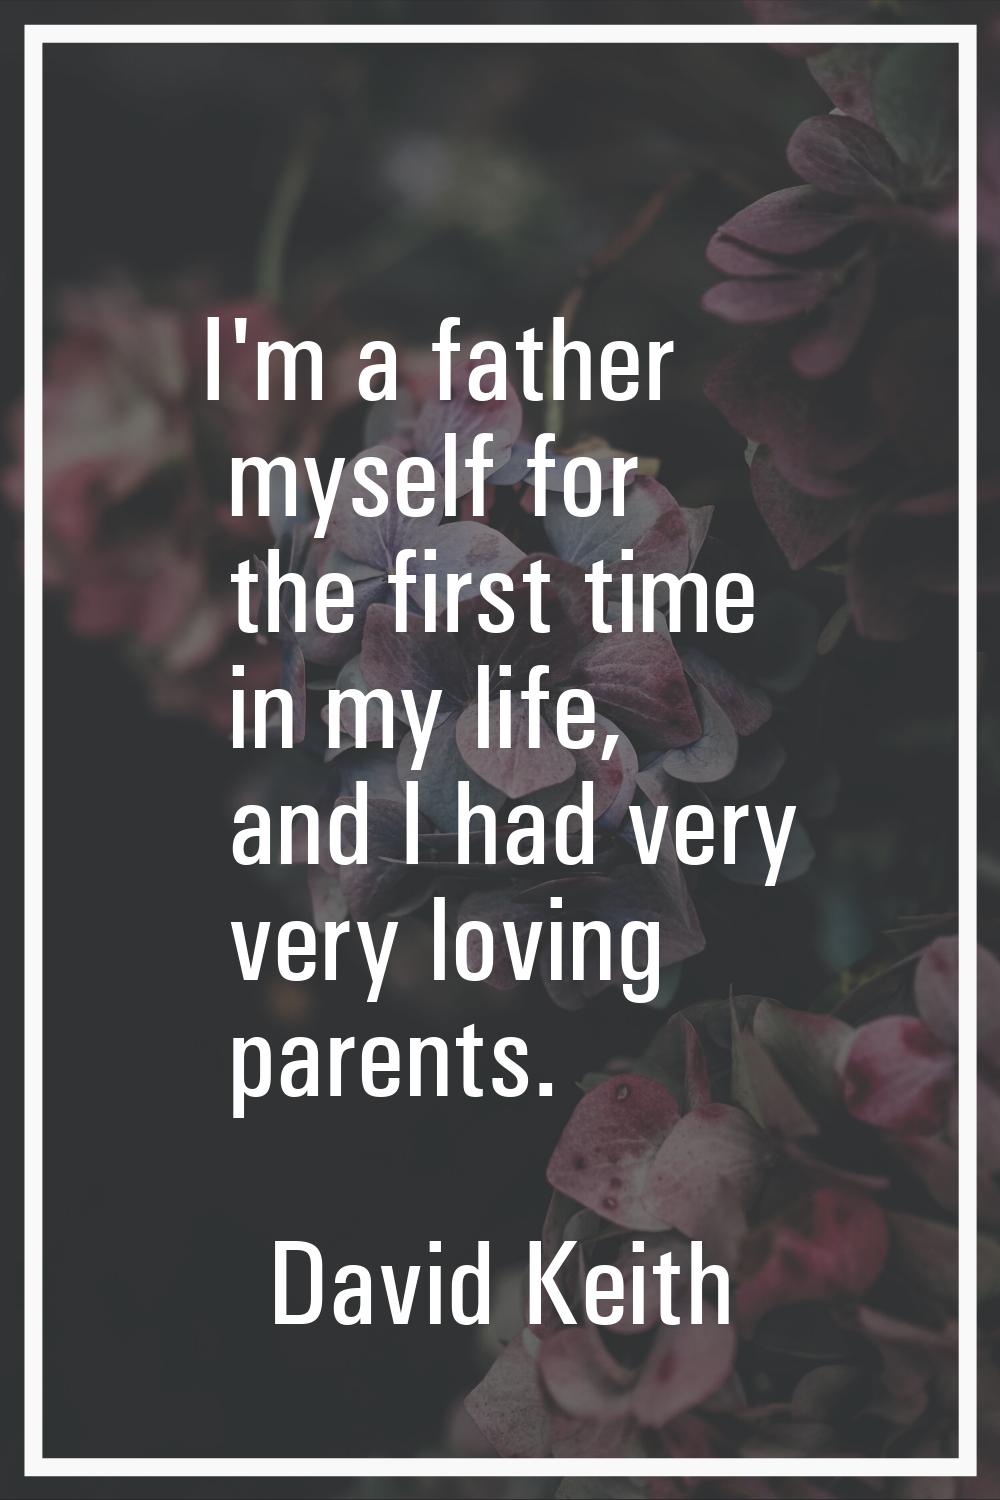 I'm a father myself for the first time in my life, and I had very very loving parents.